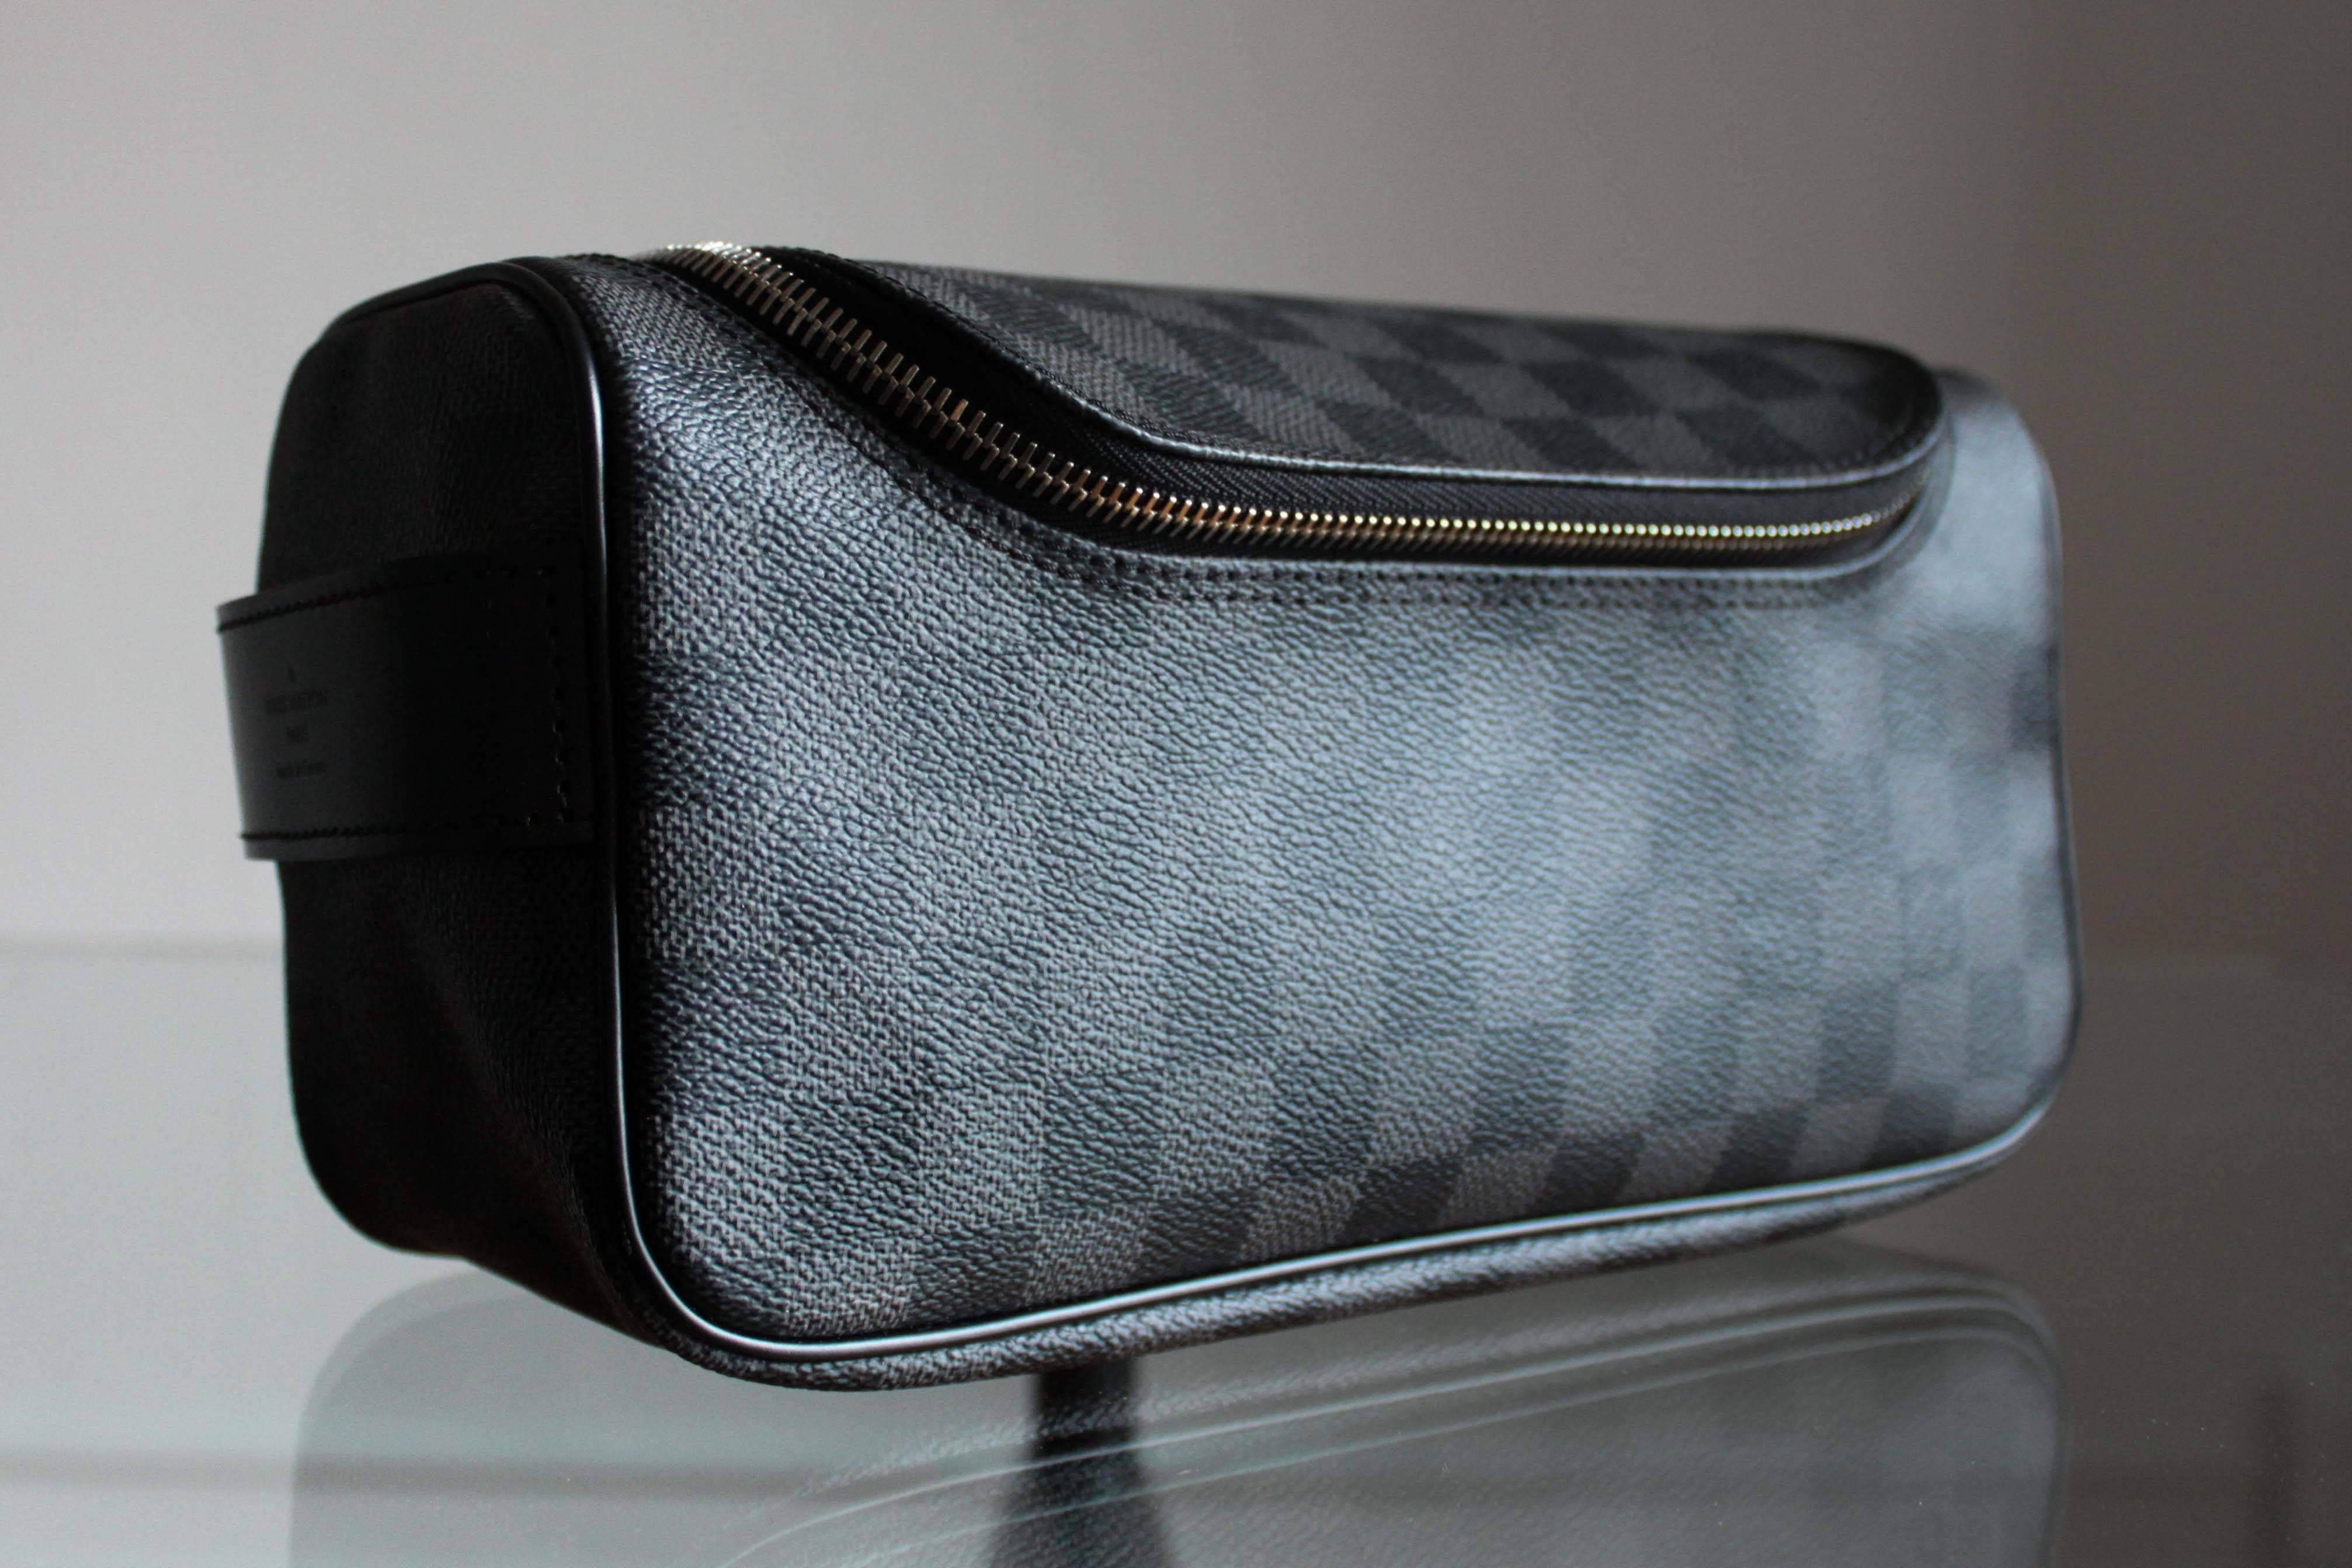 Toiletry pouch made from Damier Graphite canvas by Louis Vuitton. Interior has practical elastic attachments inside that will keep bottles vertical. As new condition, never used.